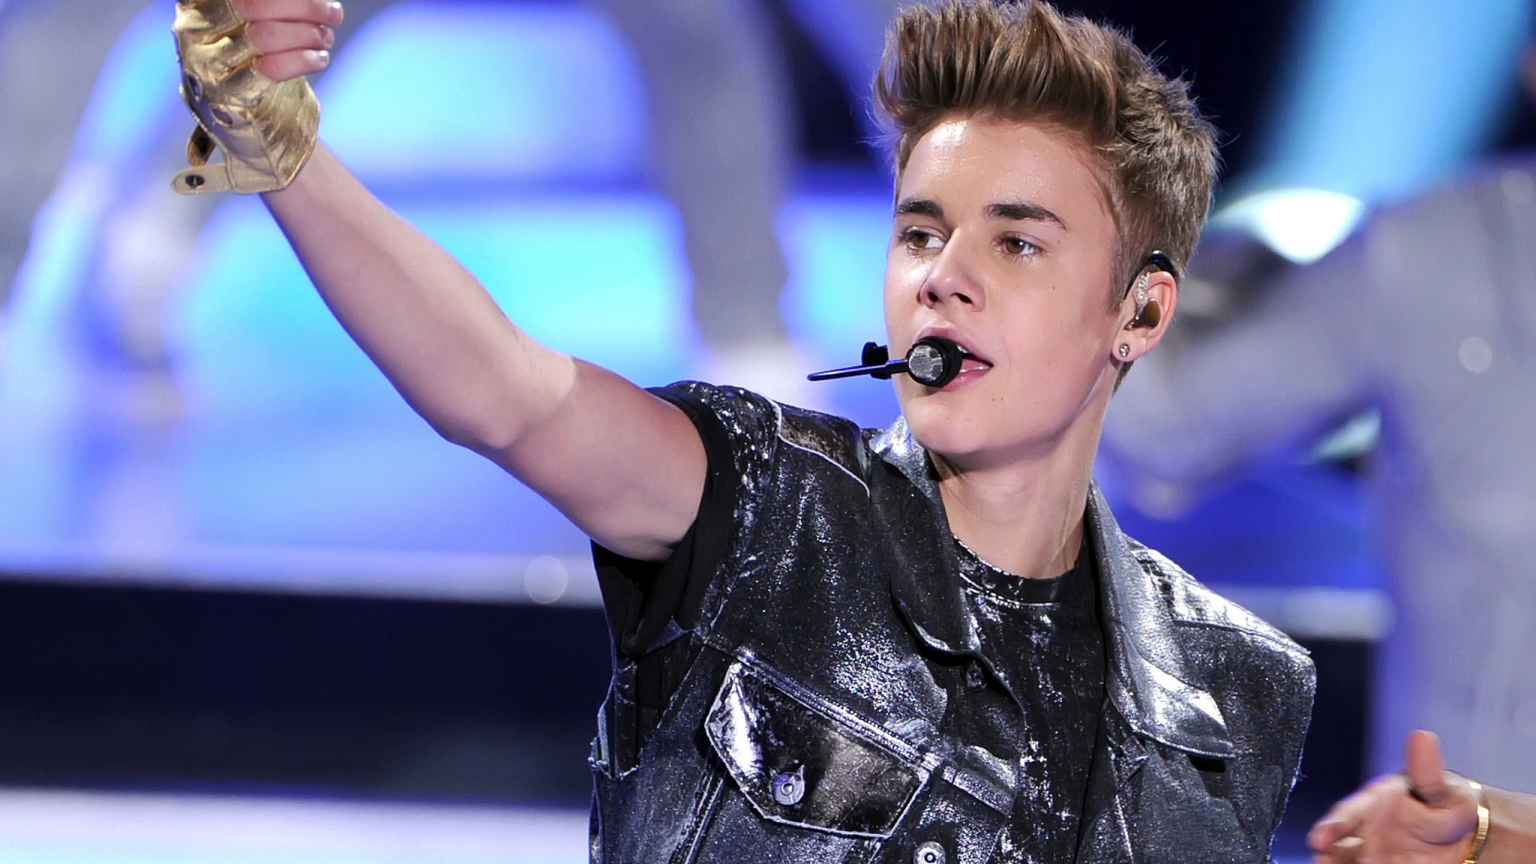 Justin Bieber on Stage for 1536 x 864 HDTV resolution